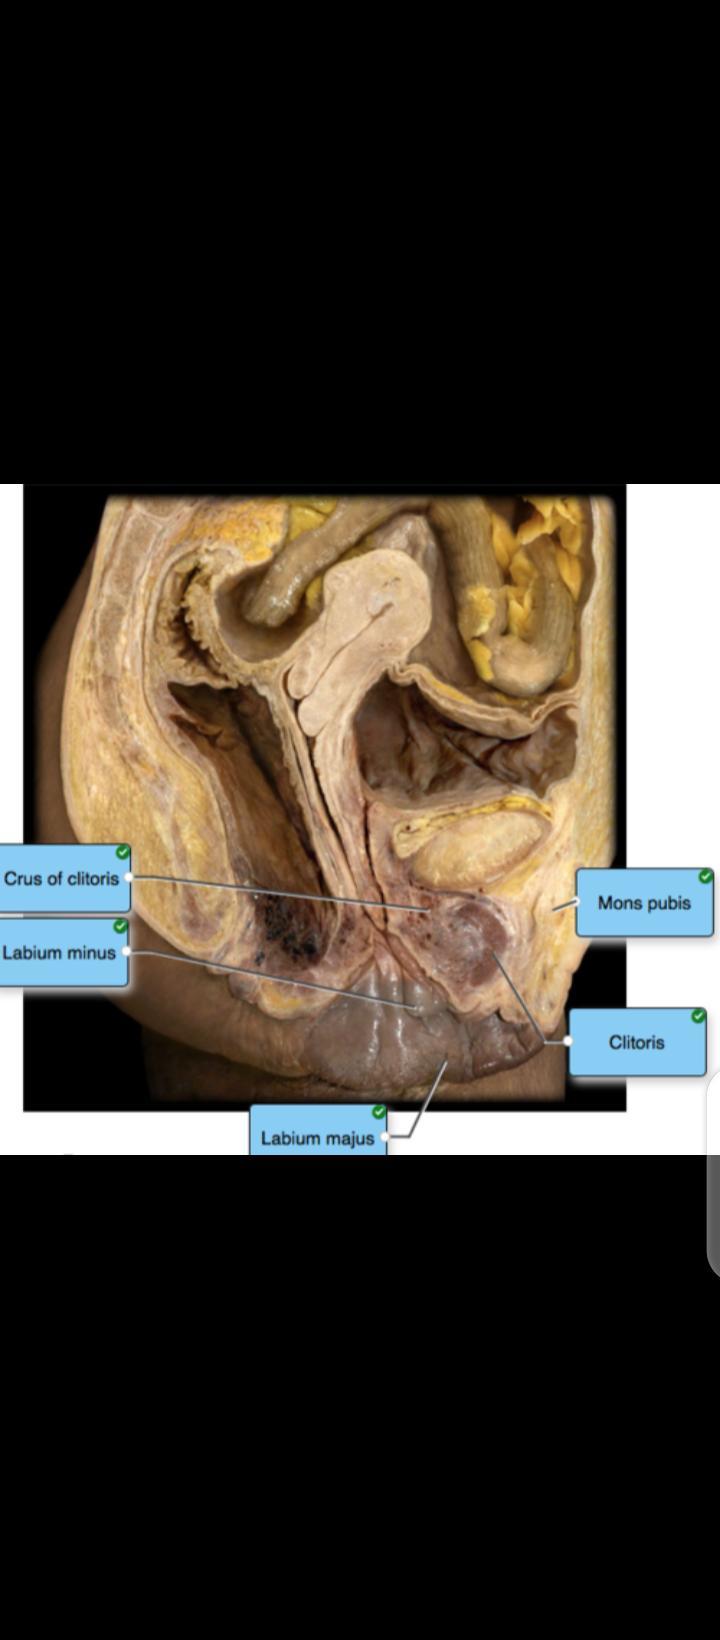 Label The Reproductive Structures Of The Female Pelvis Using The Hints Provided.